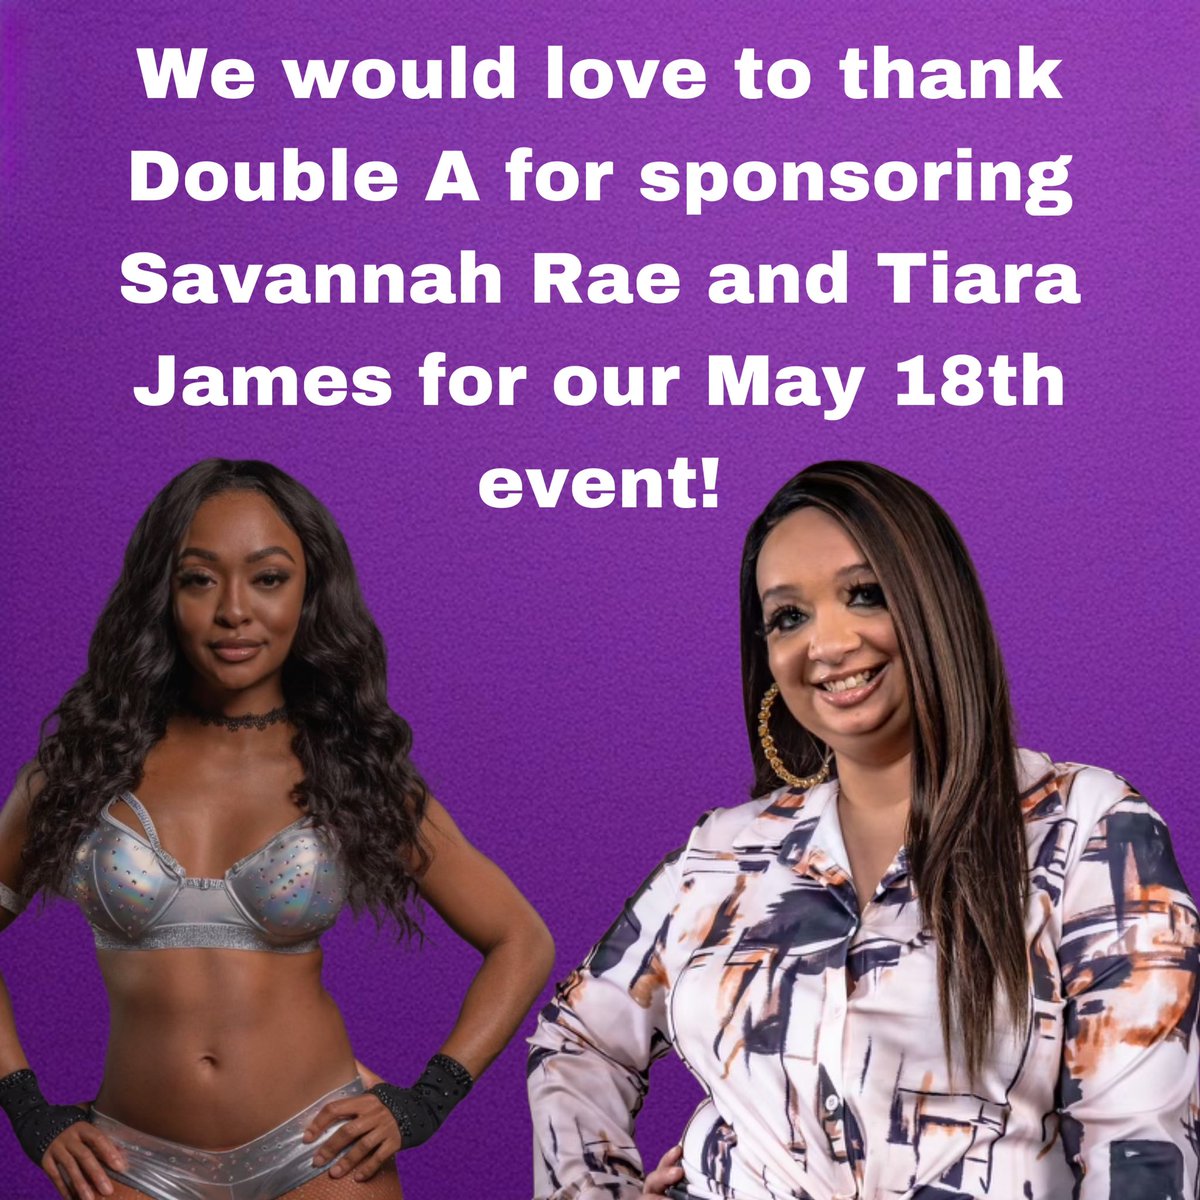 We would like to thank Double A for their sponsorship of Tiara James and Savannah Rae for our May 18th show Ding Dong!